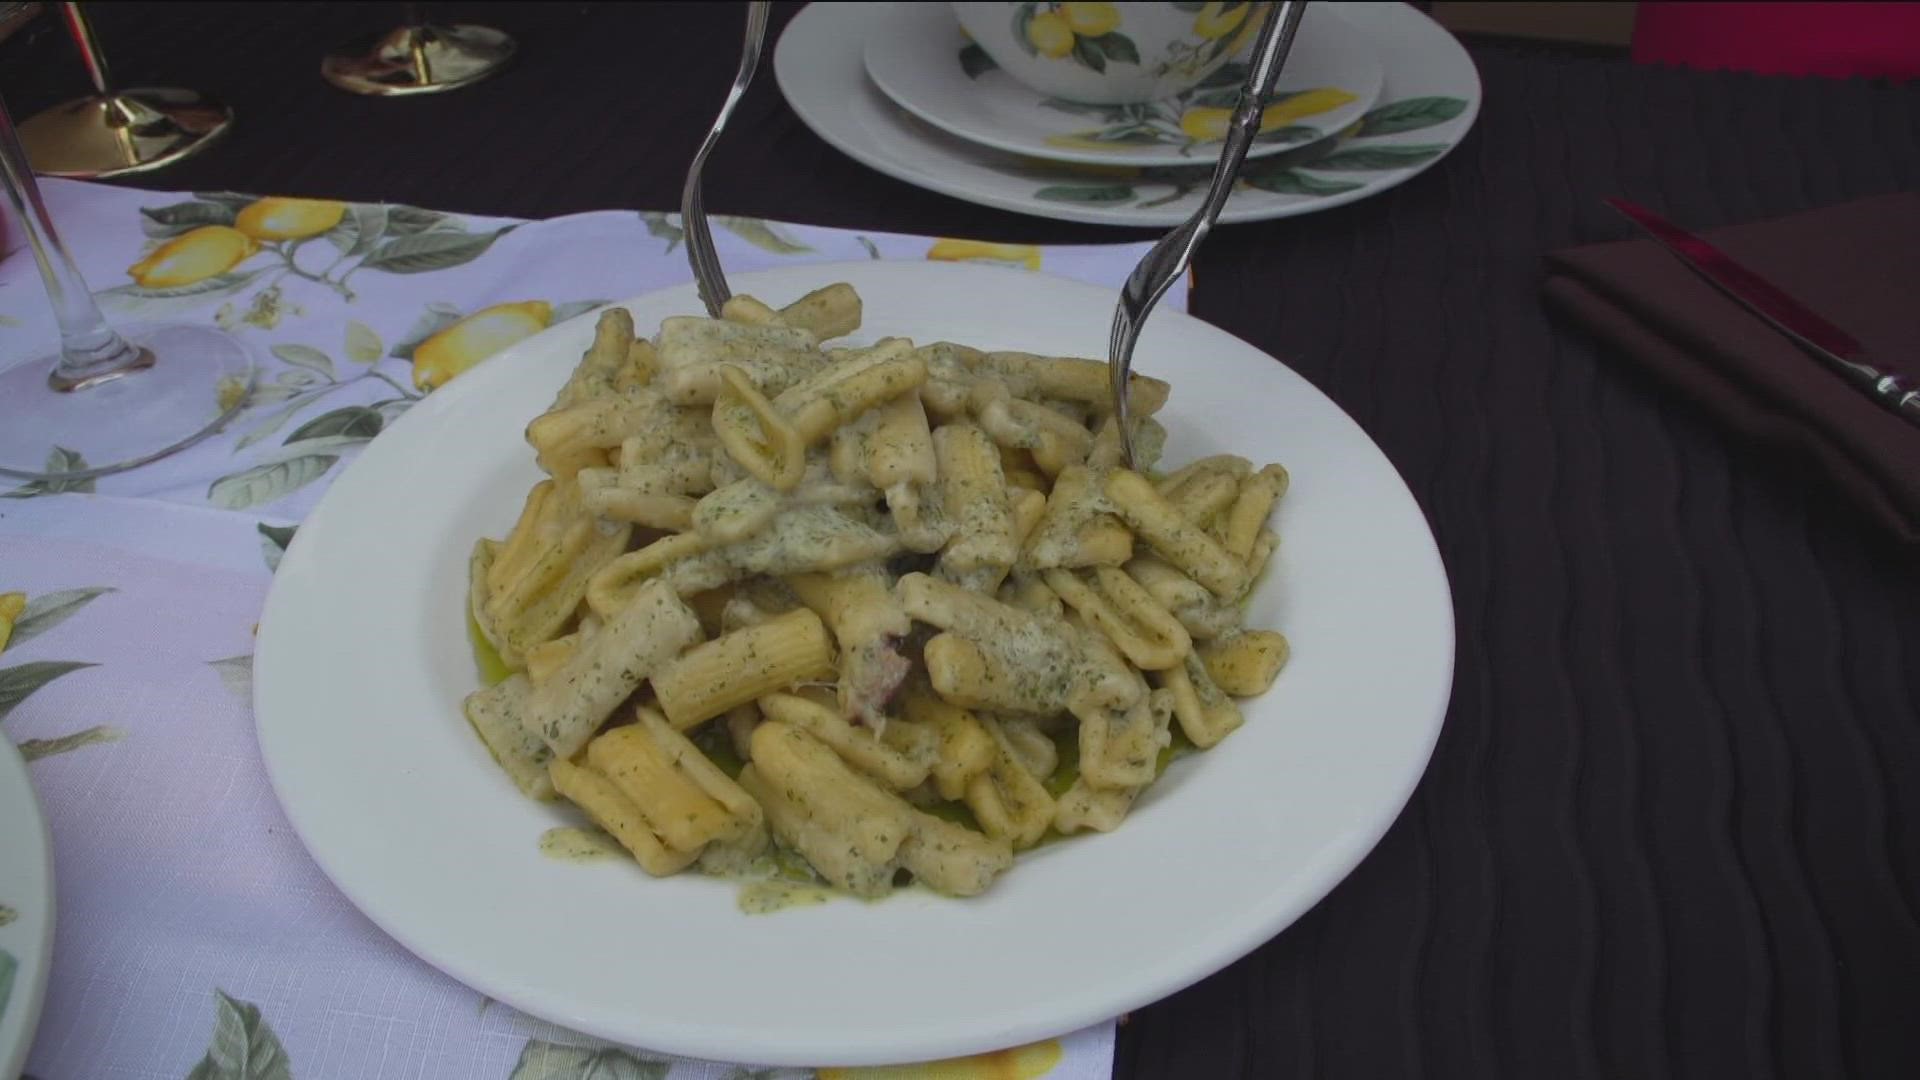 Are you ready to embark on a culinary journey across Little Italy? Foodie favorite "Taste of Little Italy" is returning for 2022.